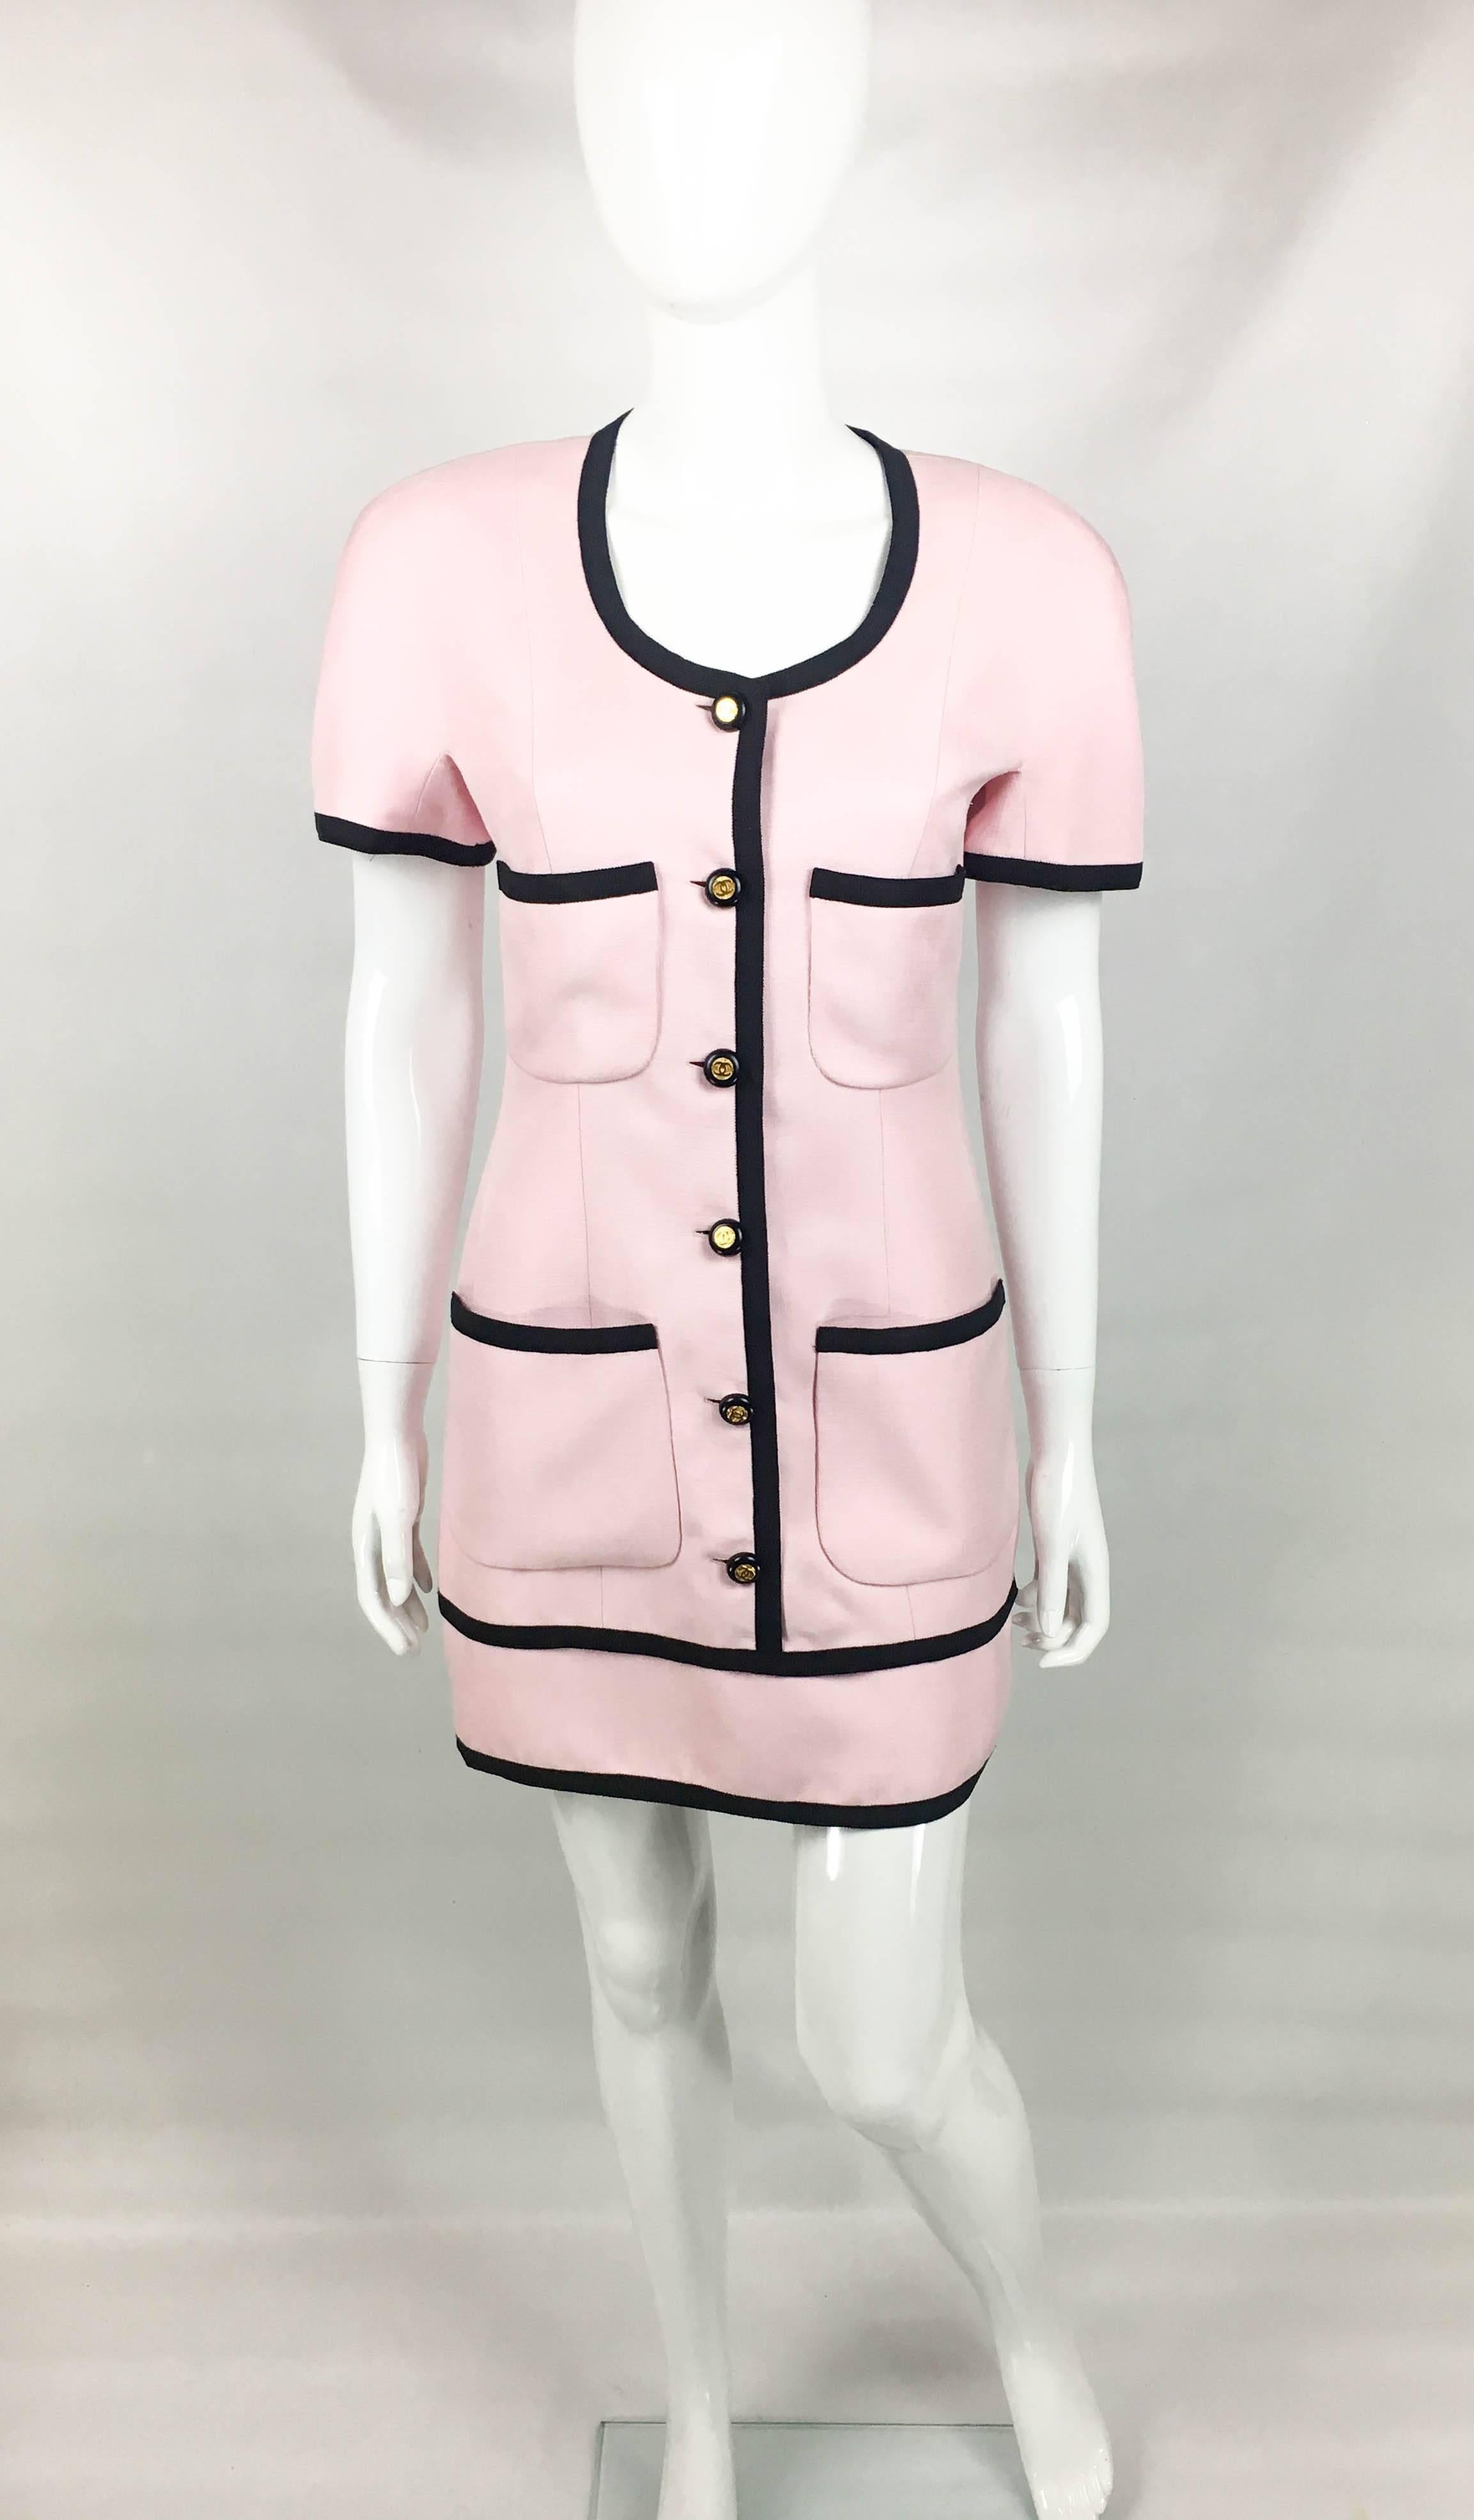 chanel dress with logo